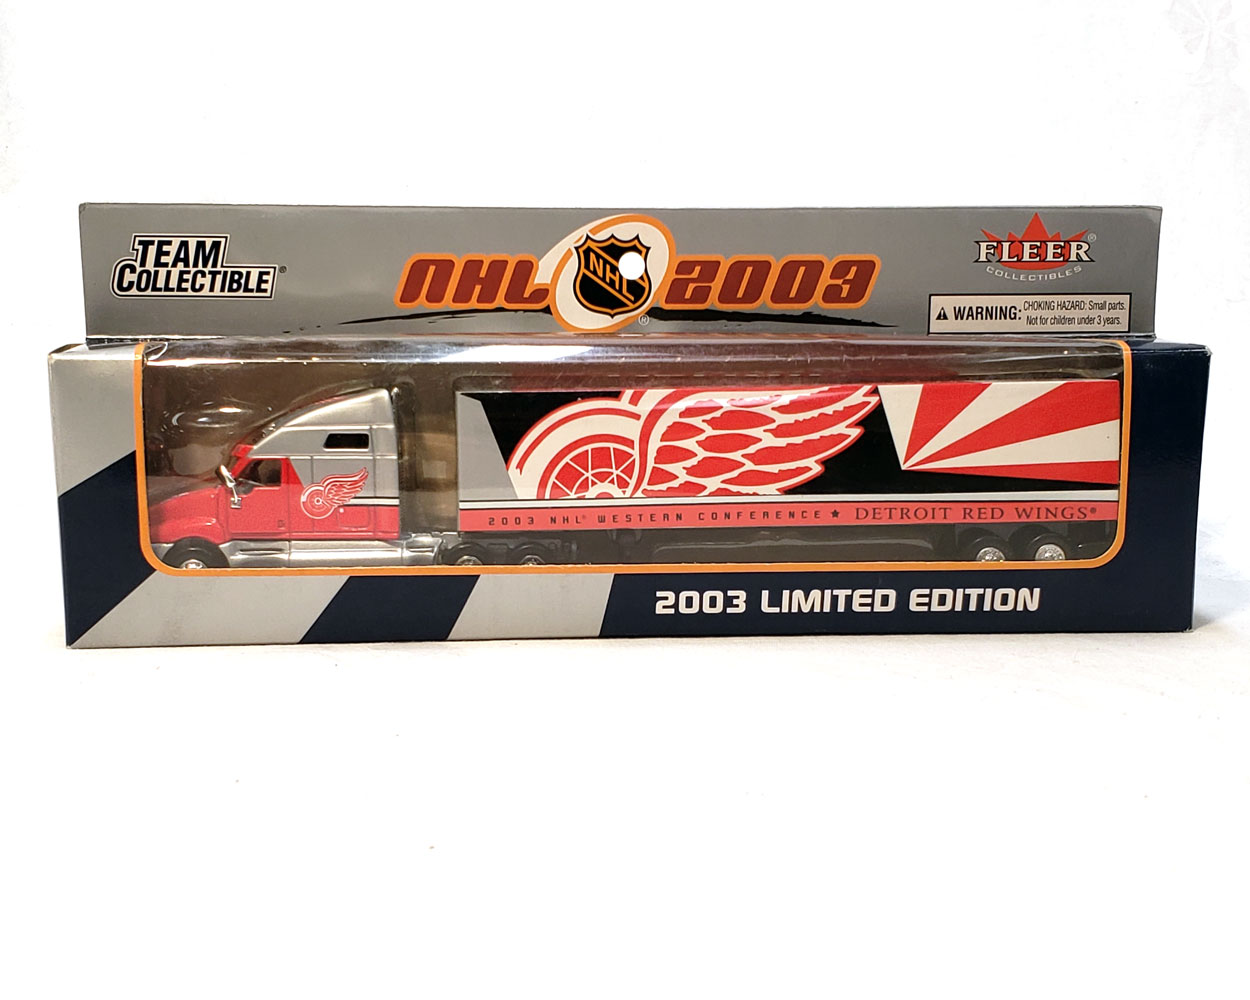 Detroit Red Wings Memorabilia, Detroit Collectibles, Red Wings